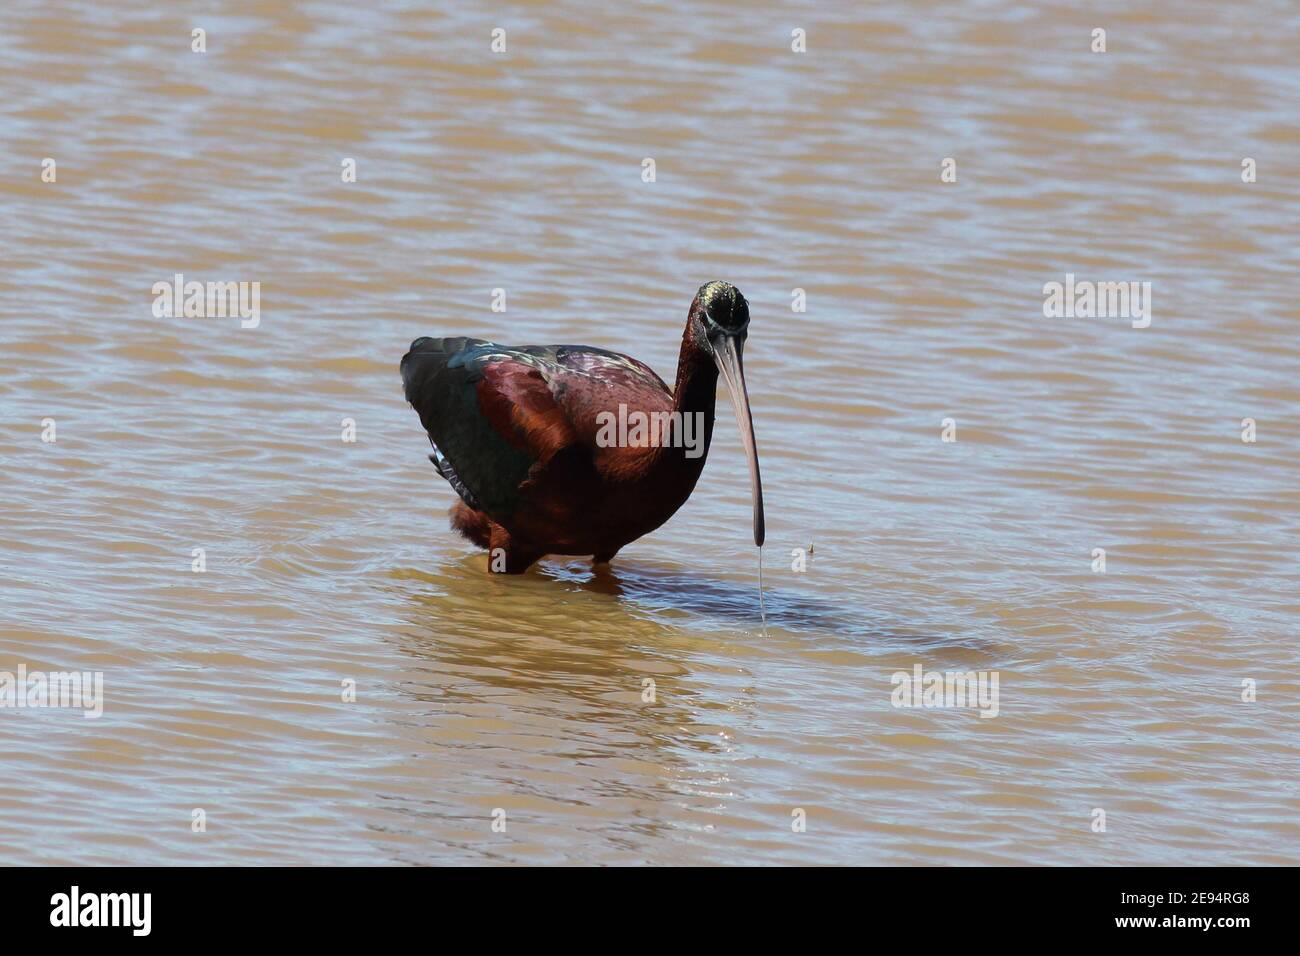 A single and iredecscent Glossy Ibis bird wading through the shallow waters on the edge of Donana National Park at El Rocio, Andalusia, Spain. Stock Photo